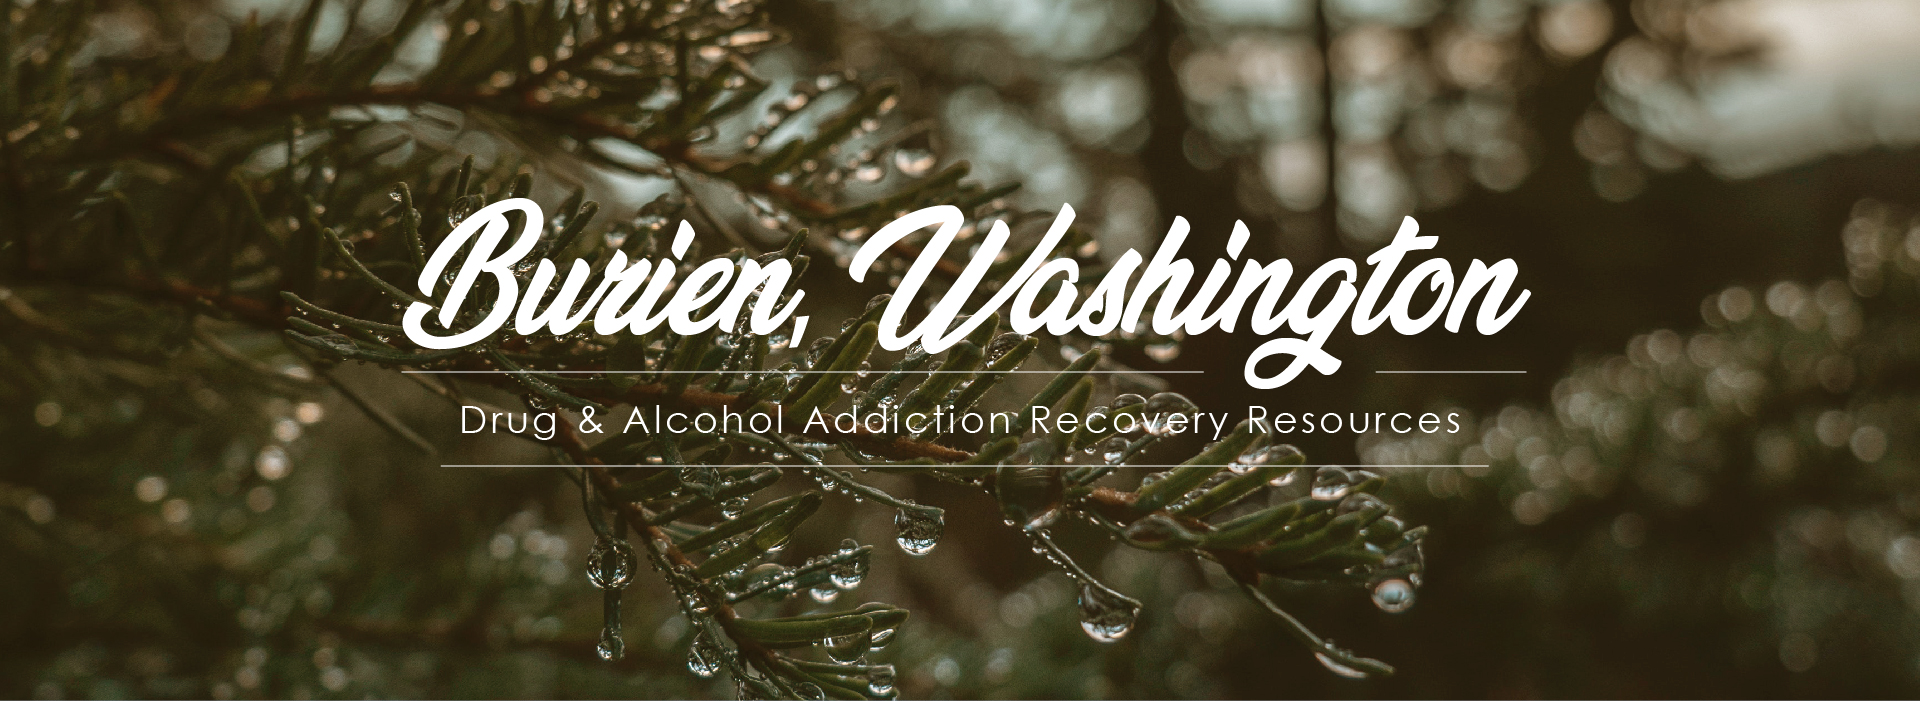 Burien, Washington, drug and alcohol addiction recovery resources